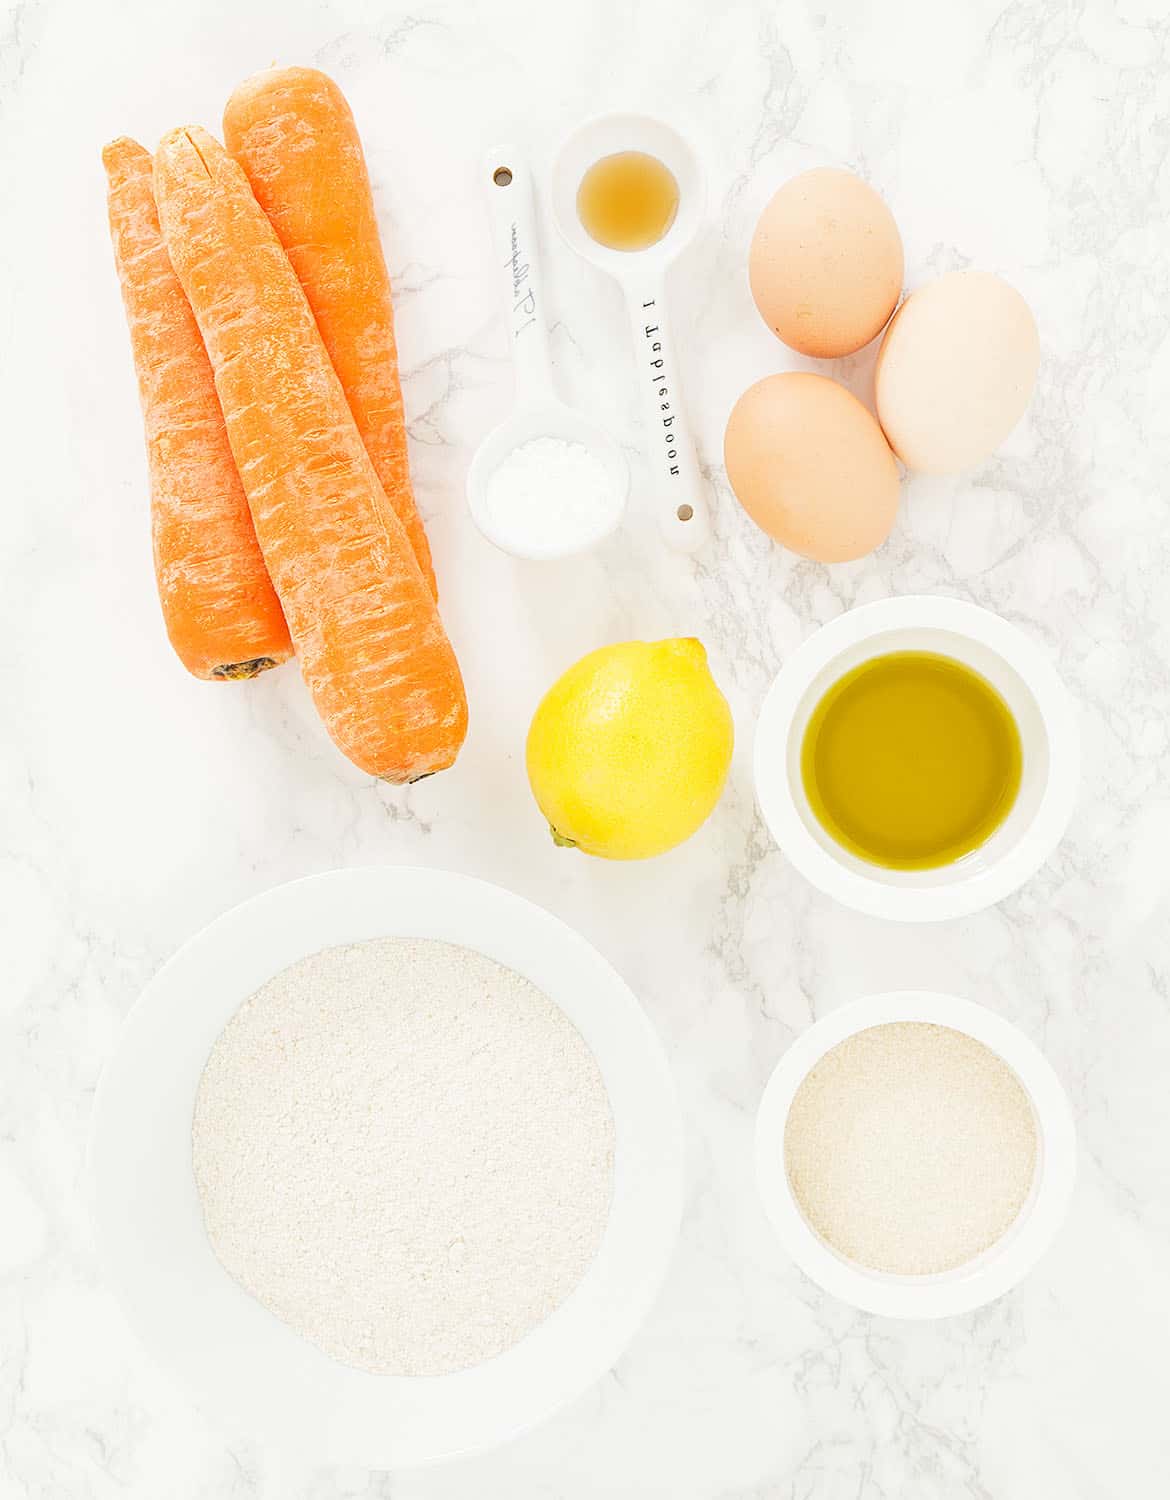 The ingredients for this healthy carrot cake are arranged over a white background.